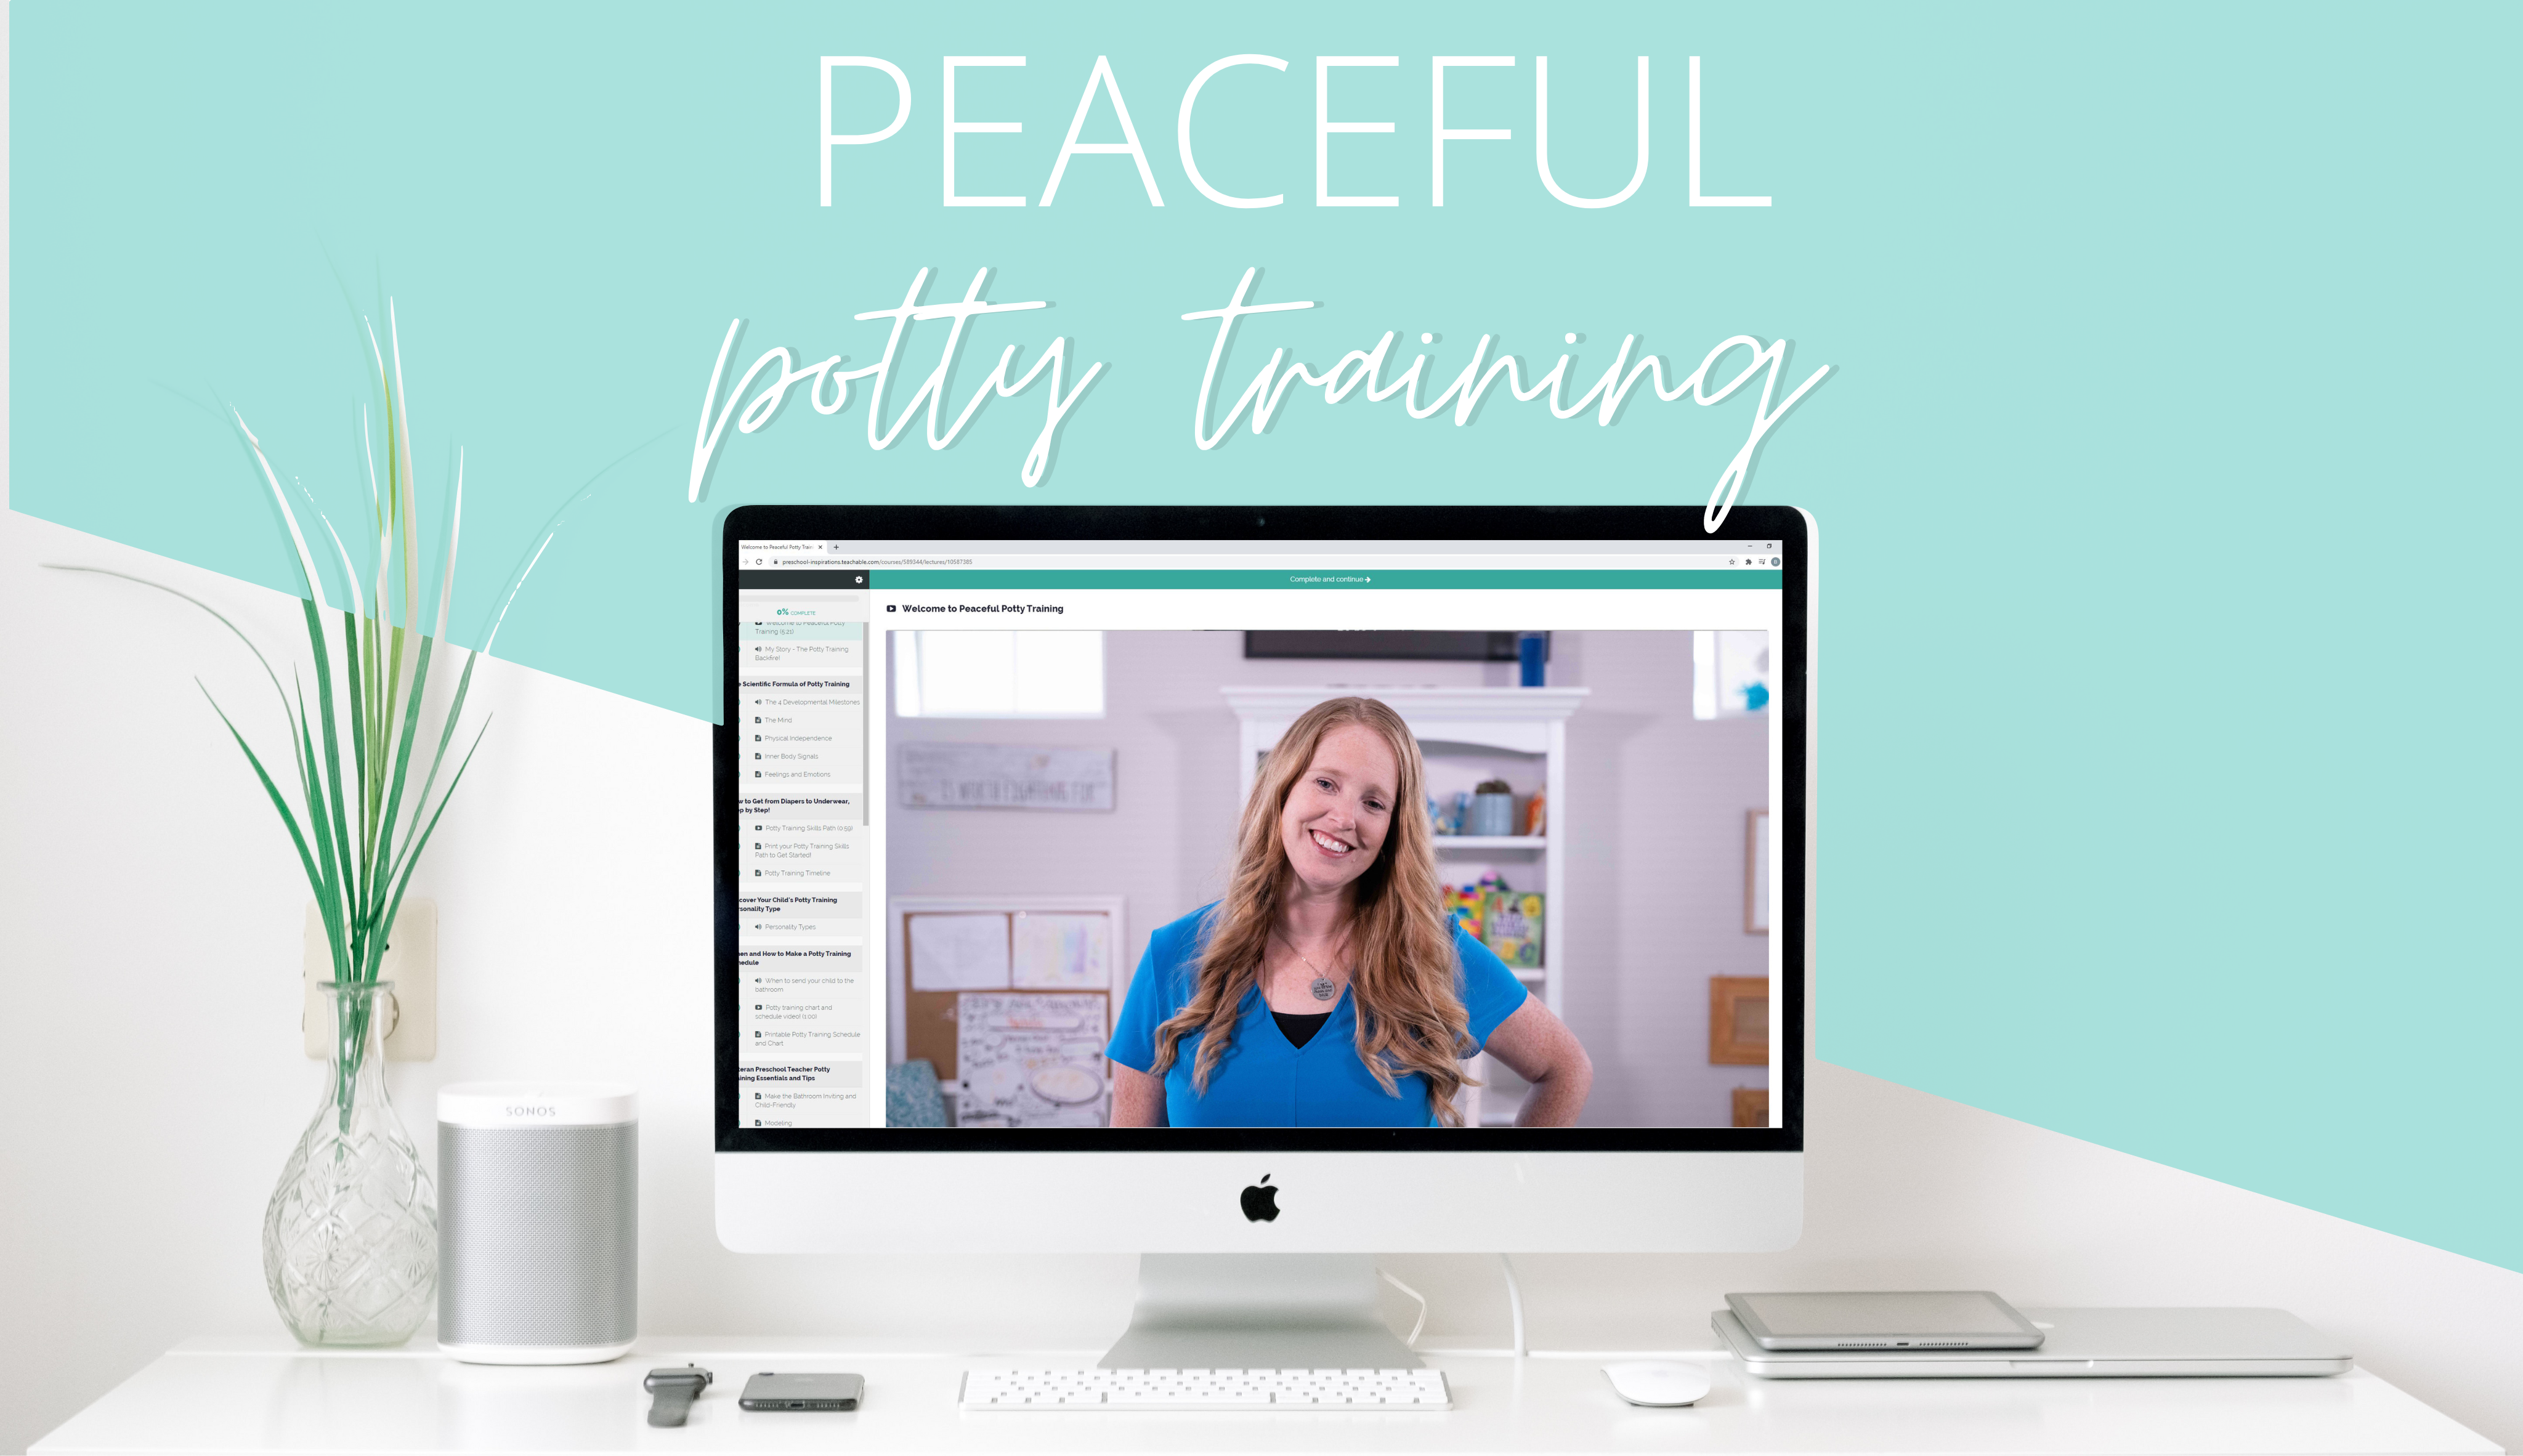 Peaceful Potty Training Online Course